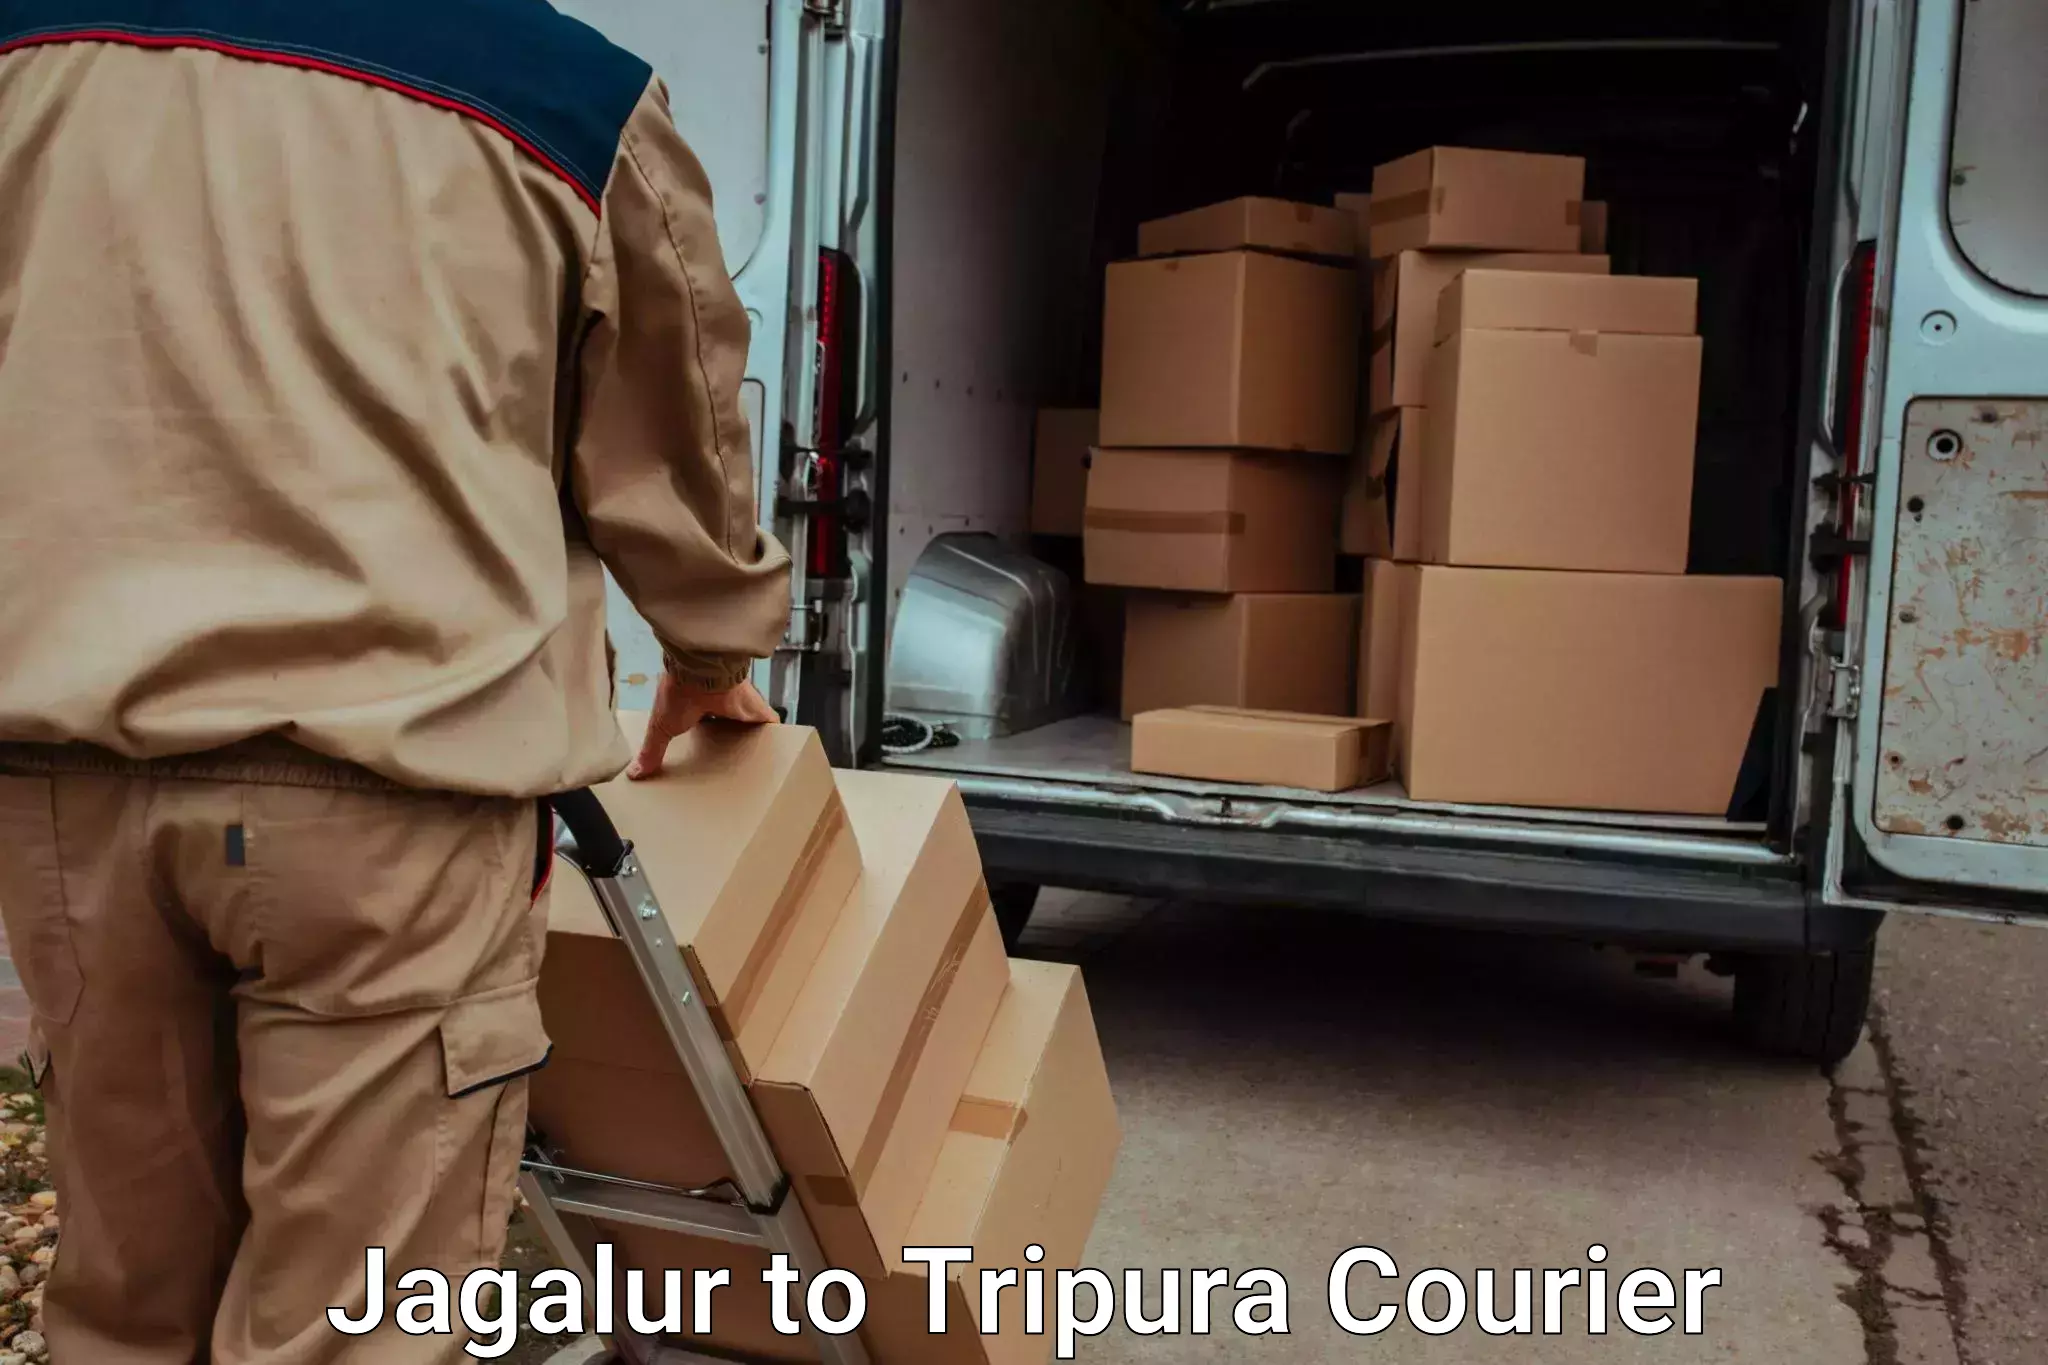 Personal luggage delivery Jagalur to Udaipur Tripura